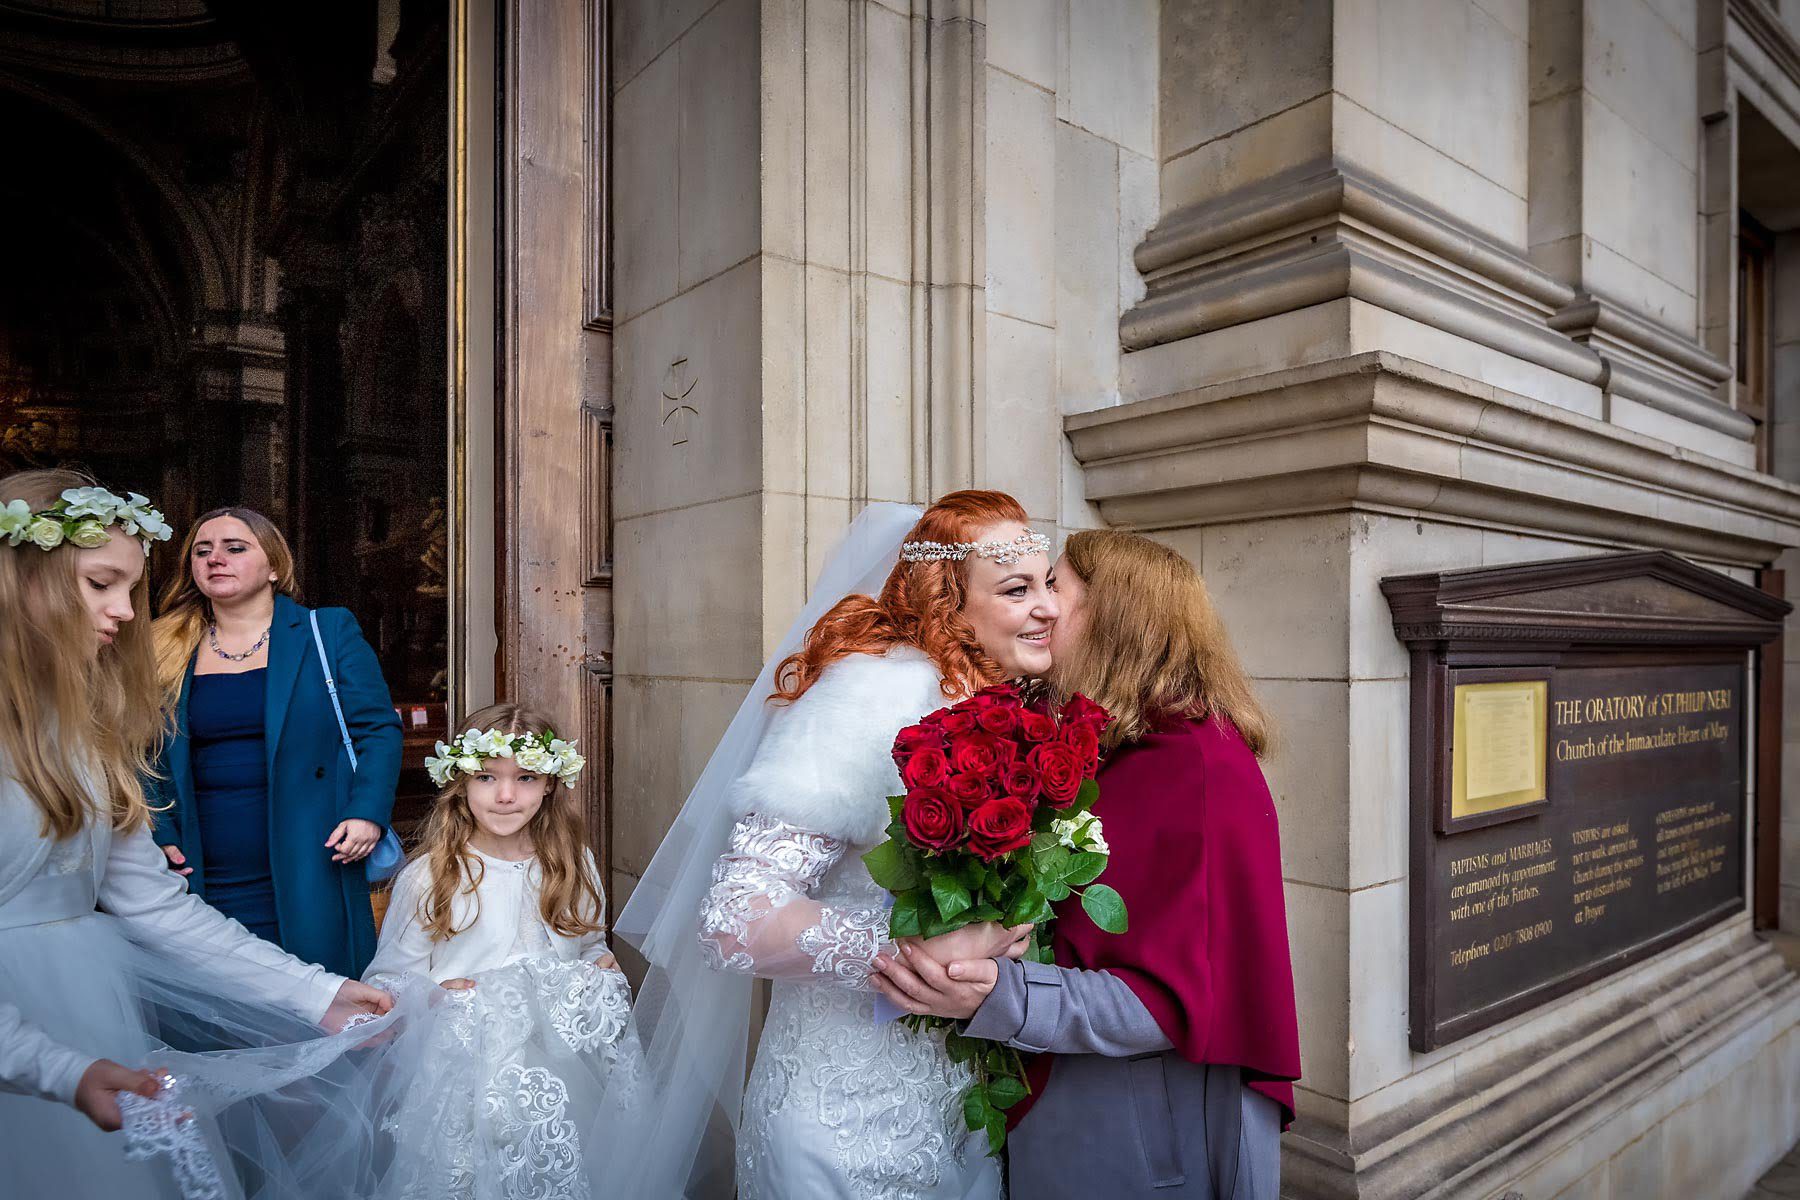 The bride greets a guest with a hug outside her Brompton Oratory wedding